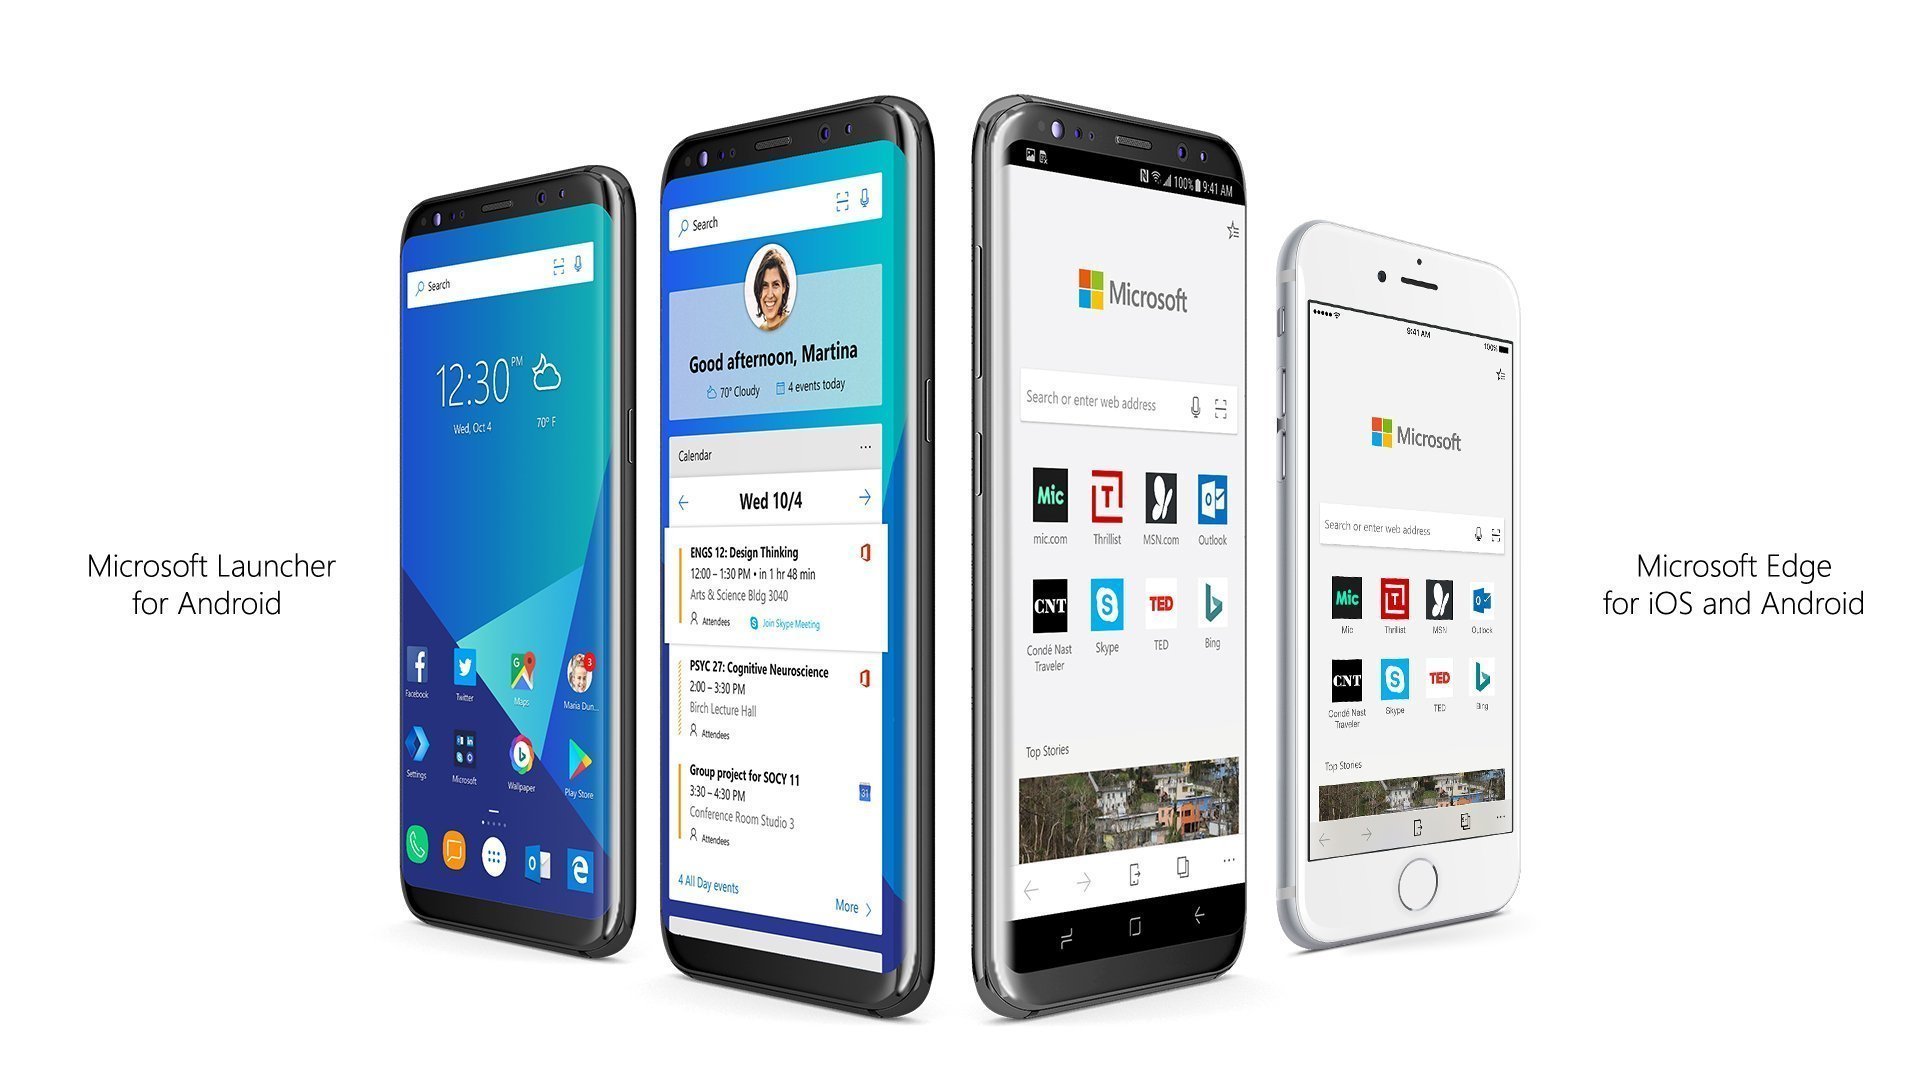 New Microsoft Launcher 4.13.1.45878 version for Android - October 16 caaf609f6273fcc3e9545708498dcded.jpg